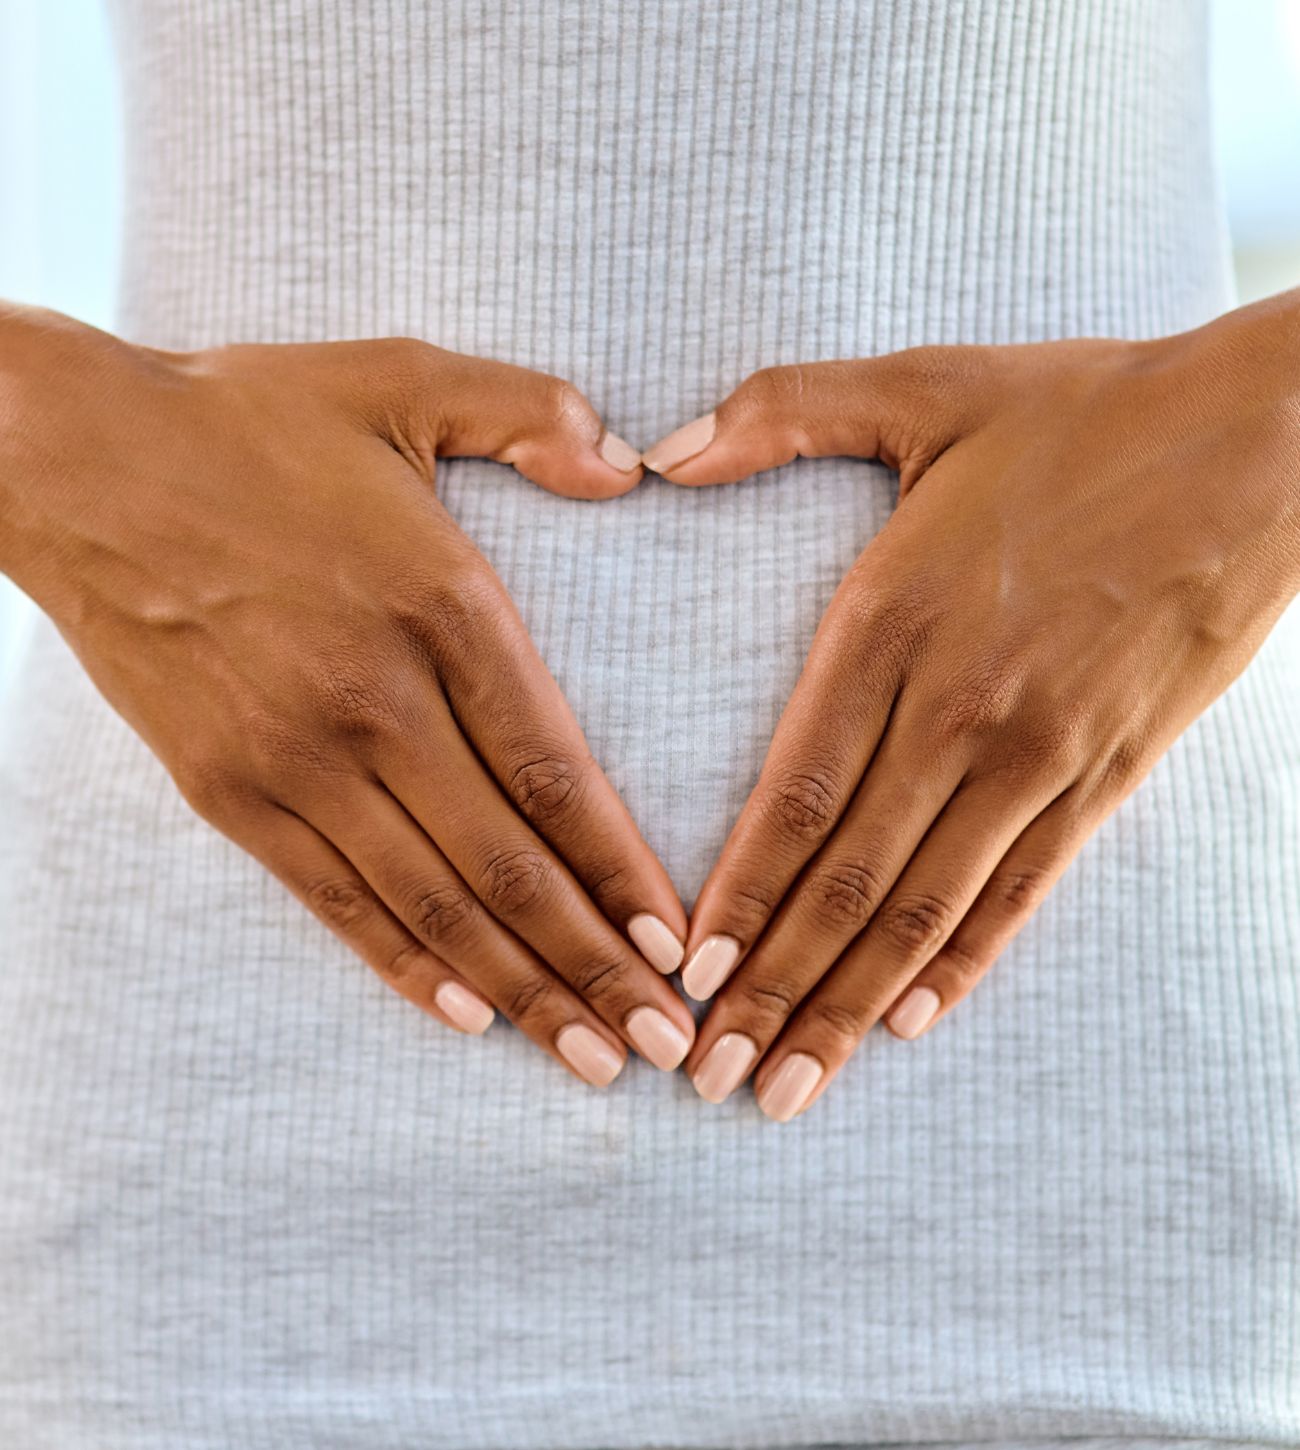 Photo of a young woman's hands in heart position on top of her stomach or gut.